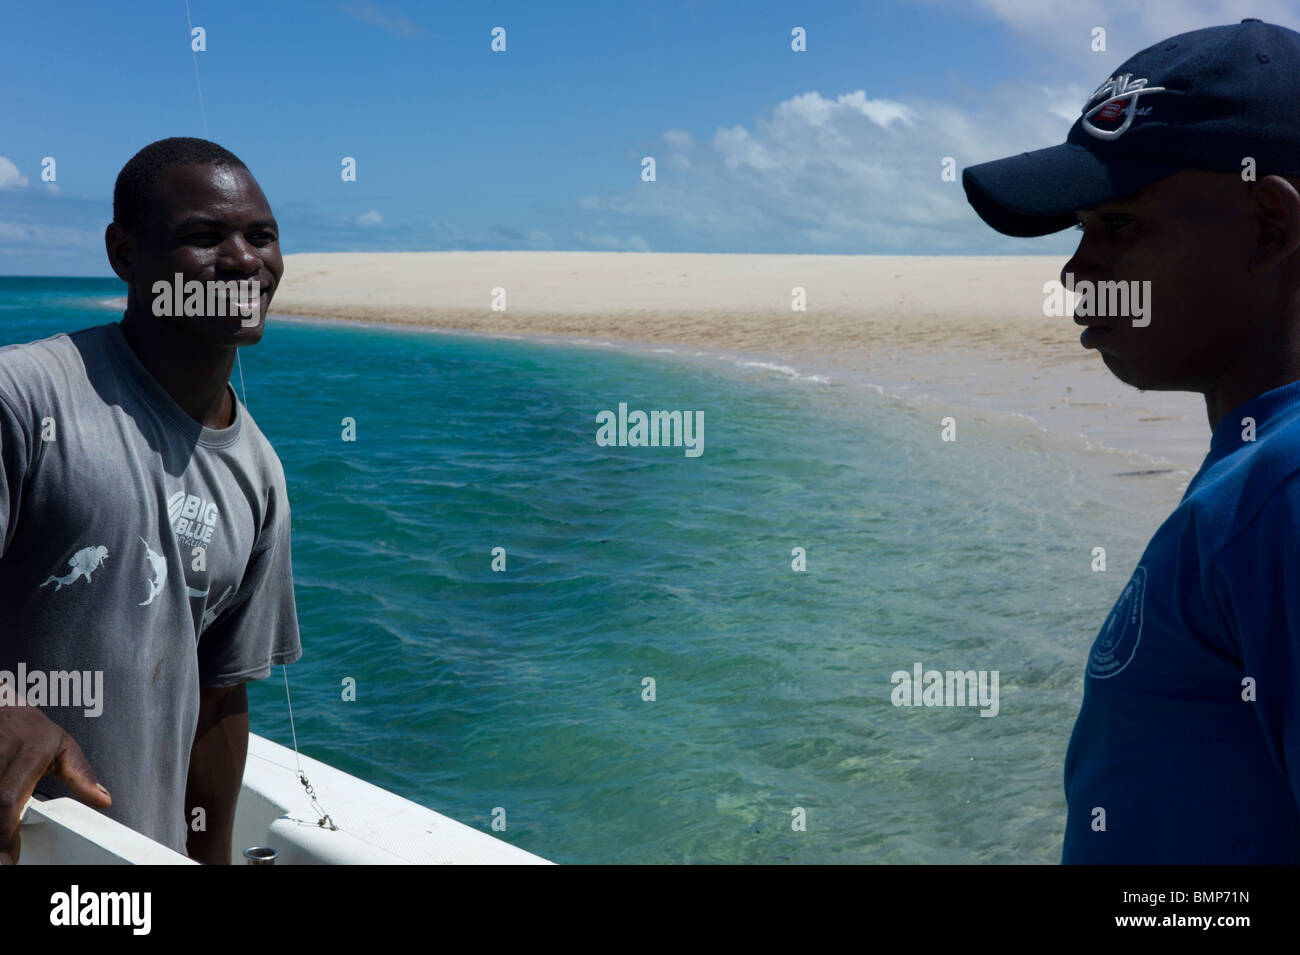 Two locals on a boat at Bazaruto Archipelago, Mozambique, Africa. Stock Photo